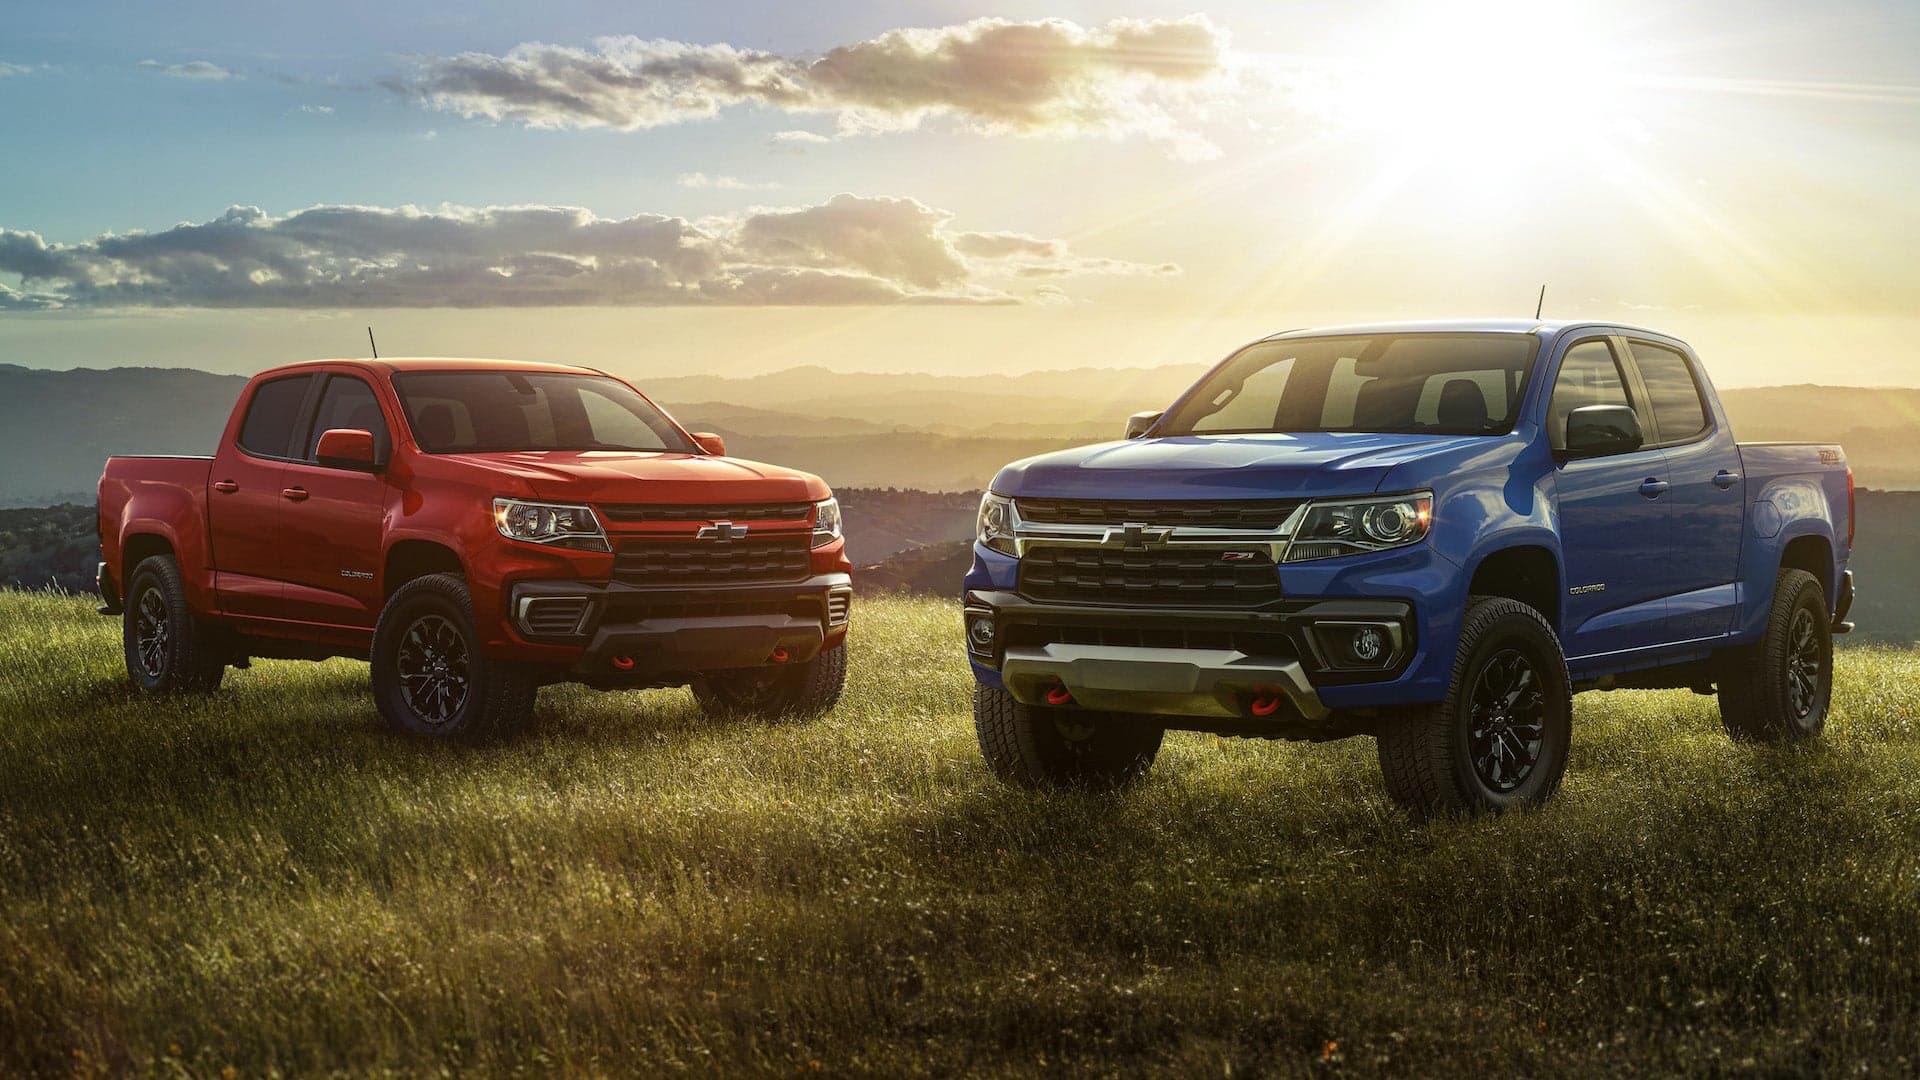 2022 Chevy Colorado With New Trail Boss Package Is a Wallet-Friendly ZR2